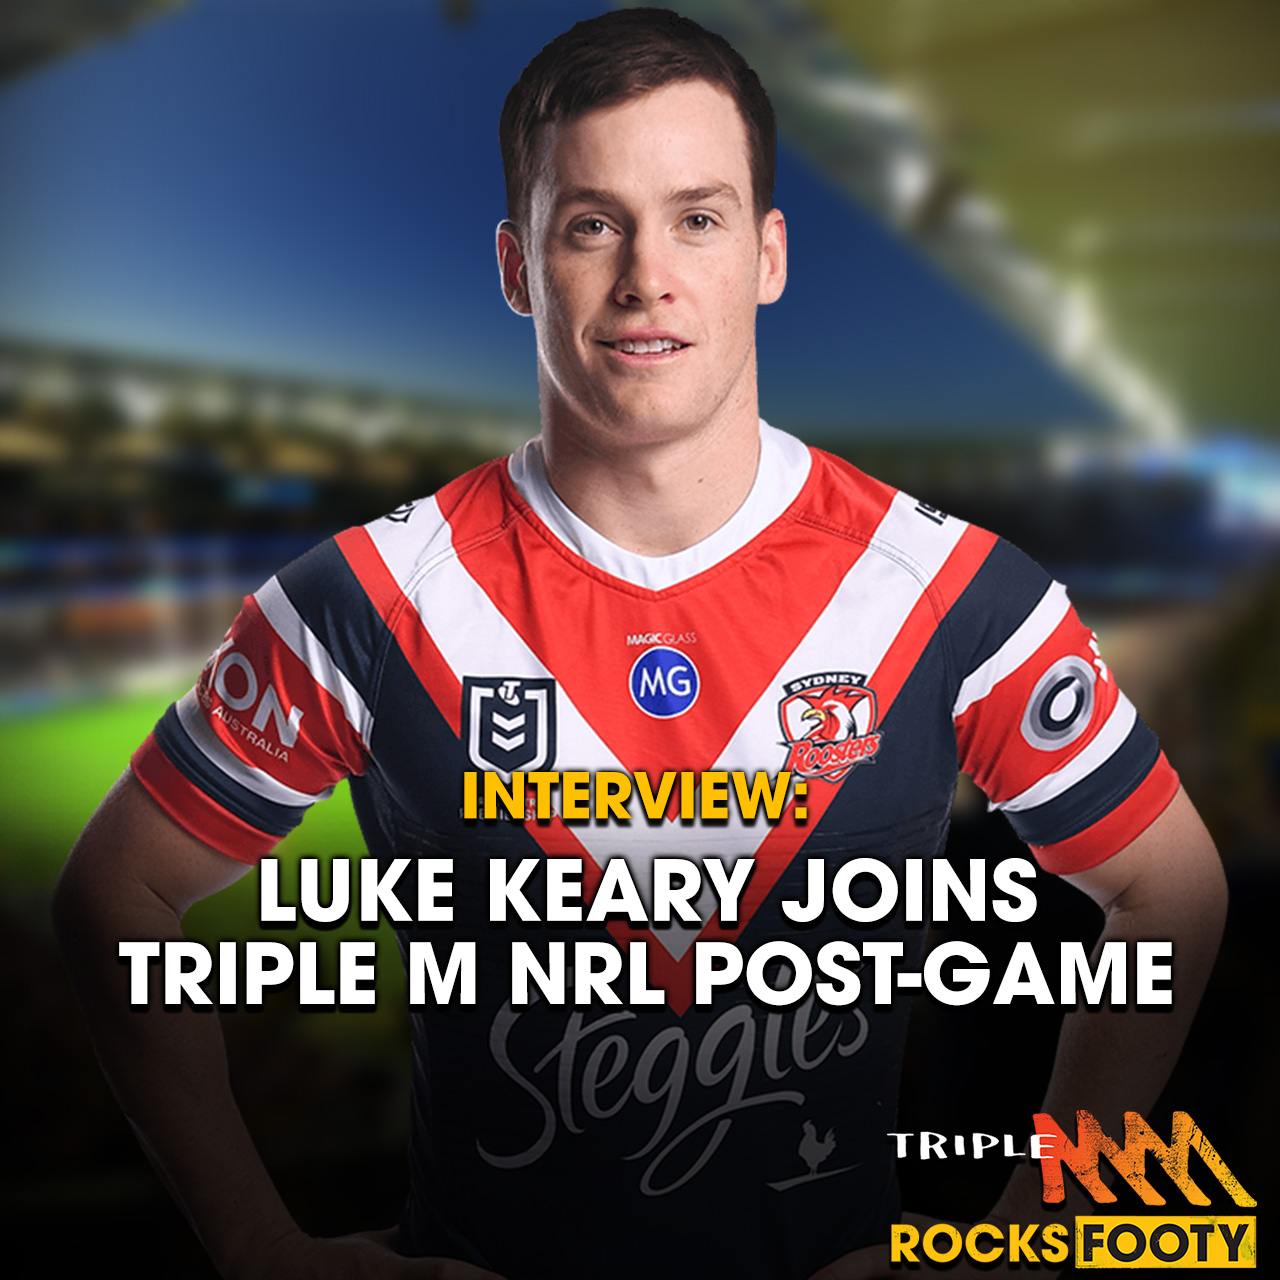 INTERVIEW: Luke Keary Joins Triple M NRL After Making Yet Another NRL Grand Final